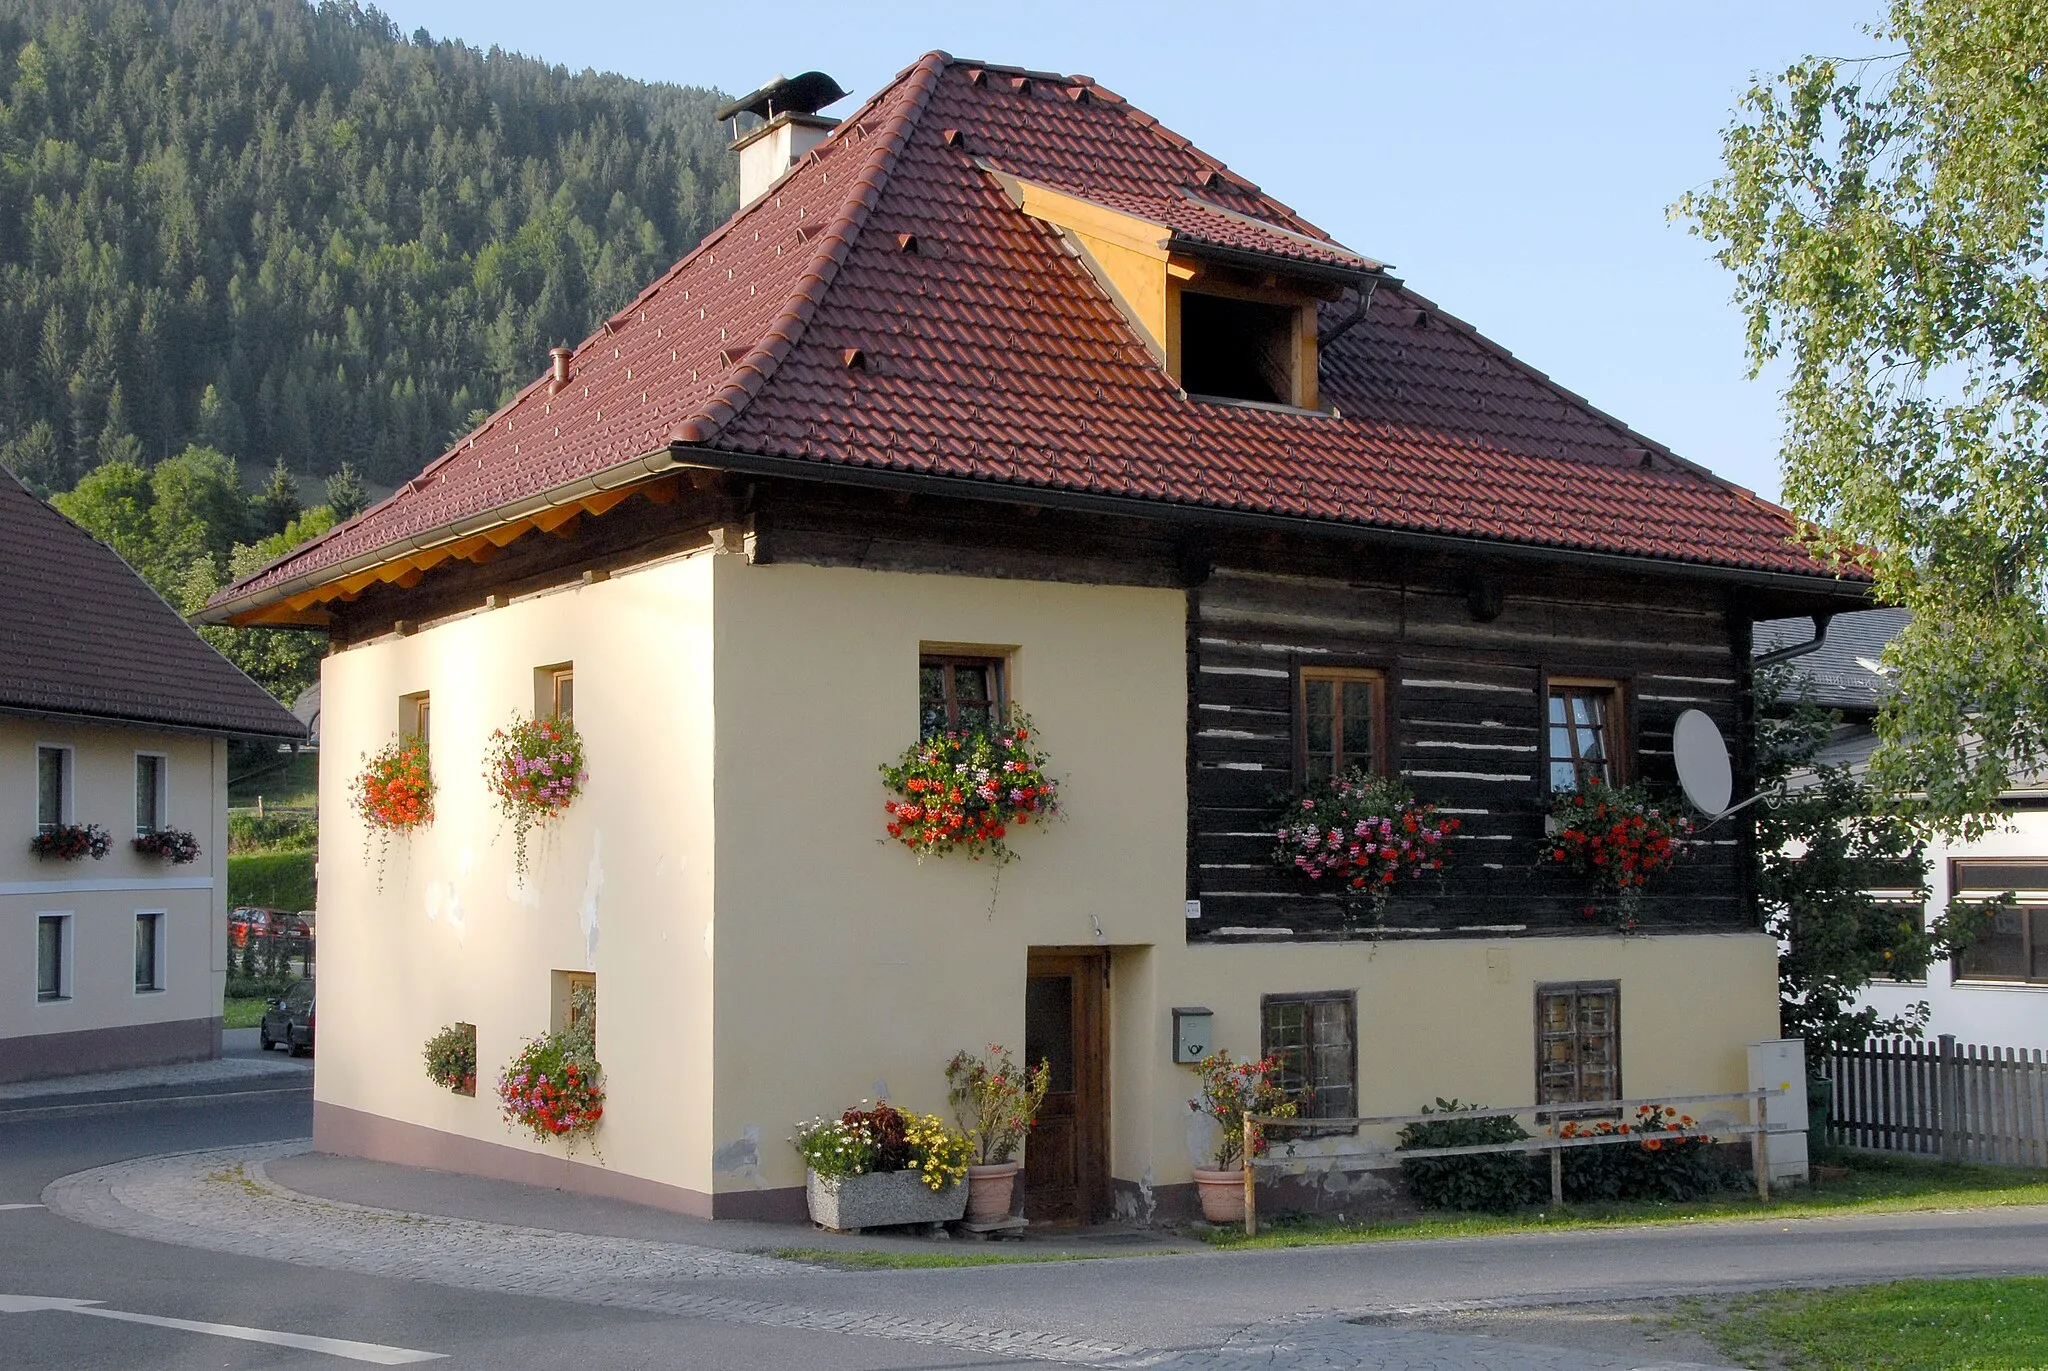 Photo showing: Old residential house at Steuerberg, Carinthia, Austria